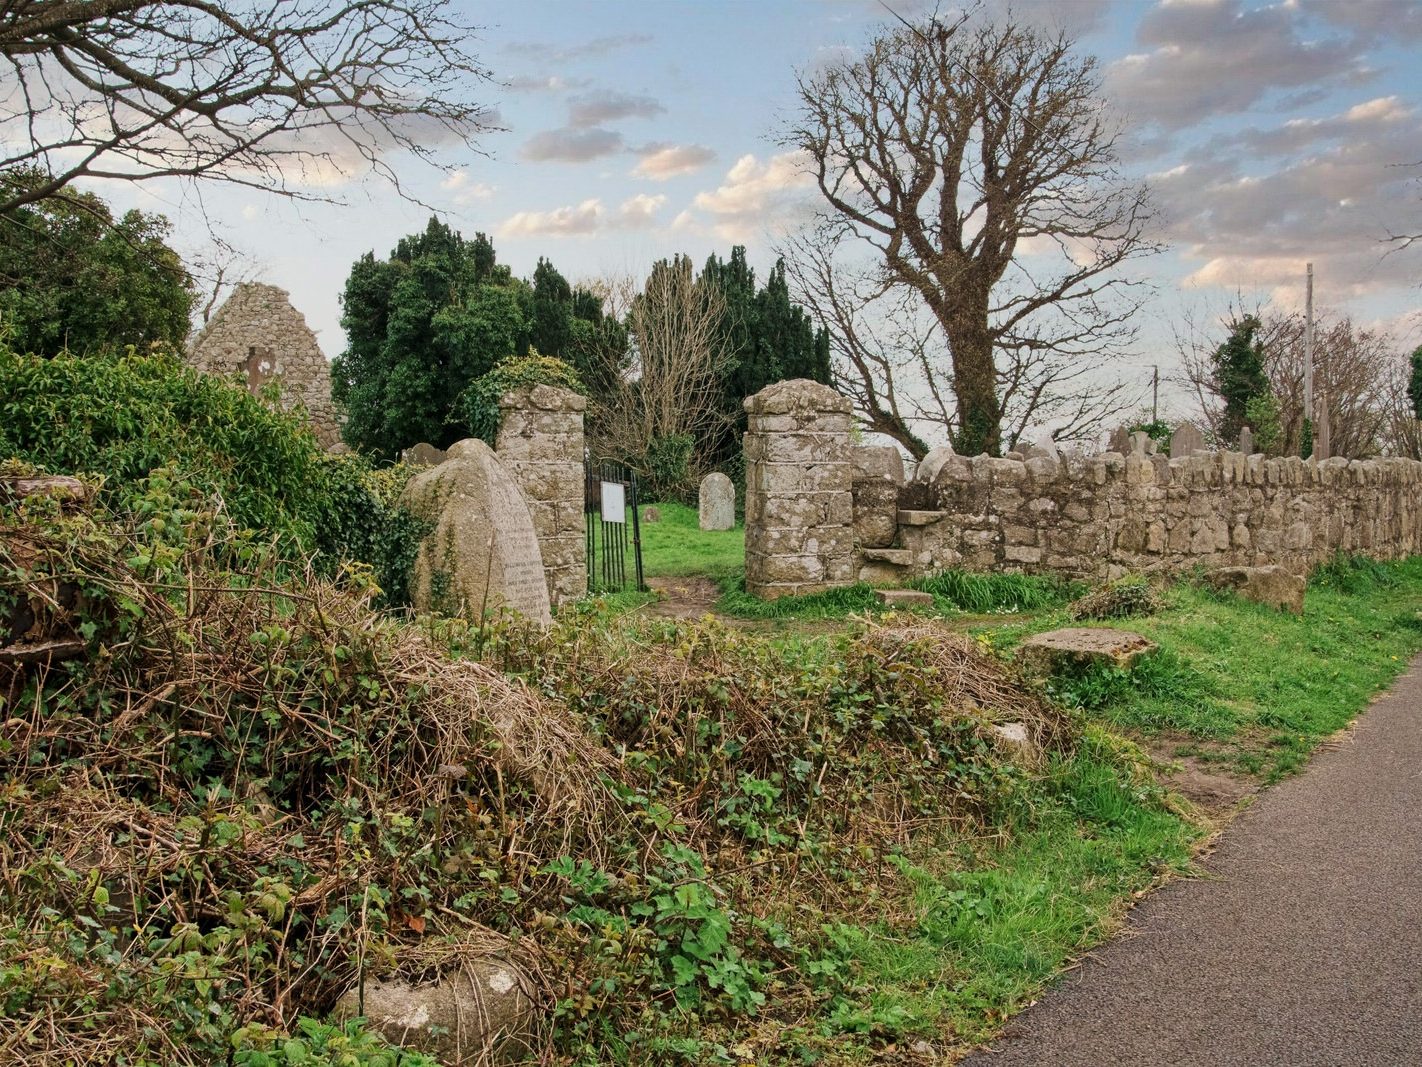 TWO CROSSES AND TULLY CHURCH AT LAUGHANSOWN LANE [THE CHURCH AND GRAVES]-223538-1